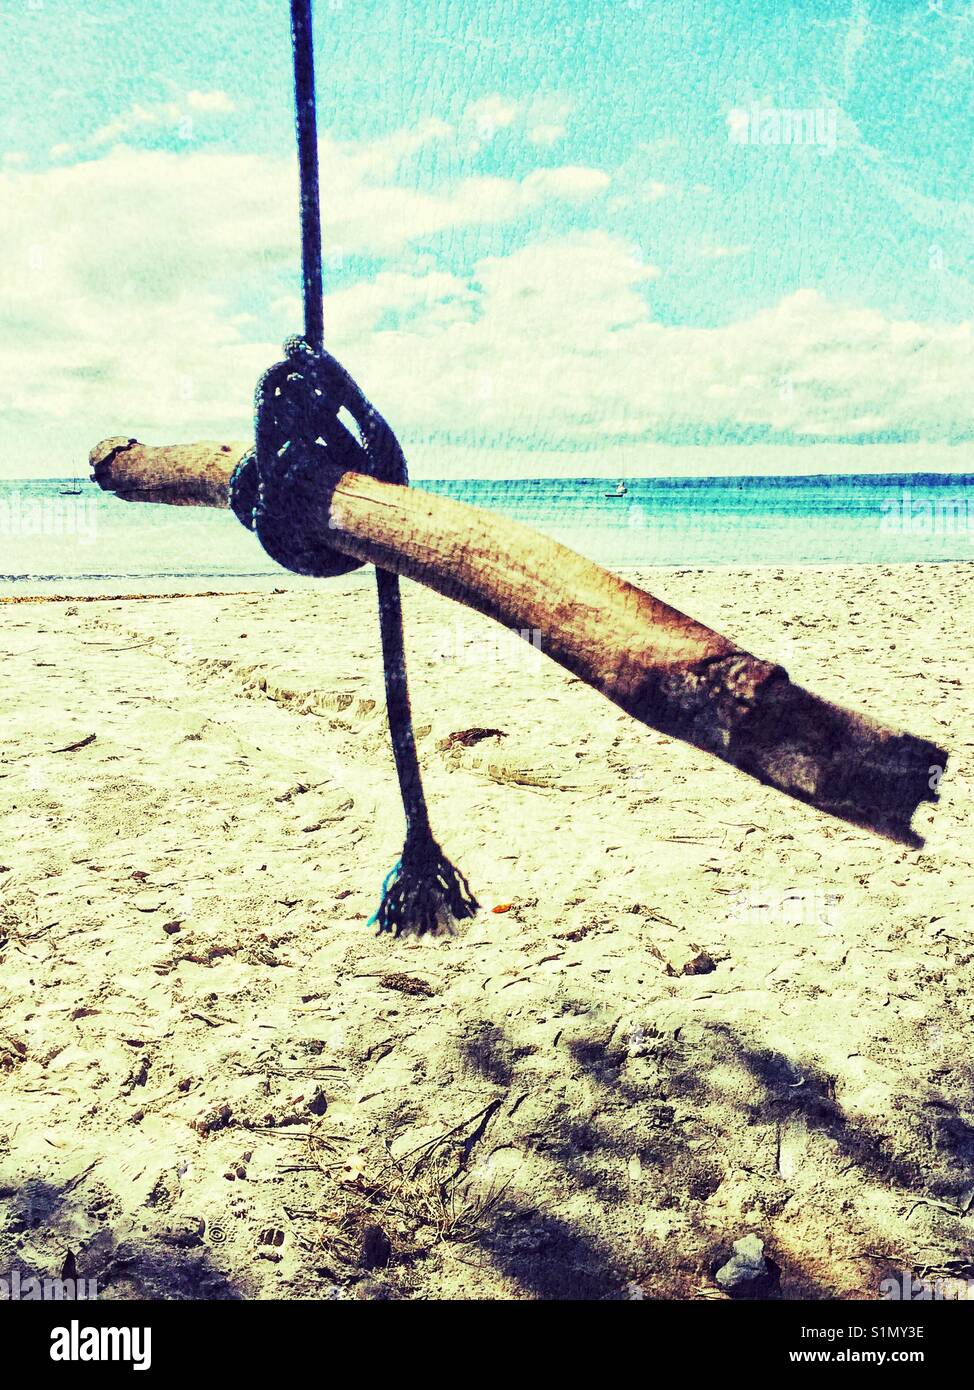 Empty beach swing on seashore. Swing made from a tree branch and rope on beach. Stock Photo